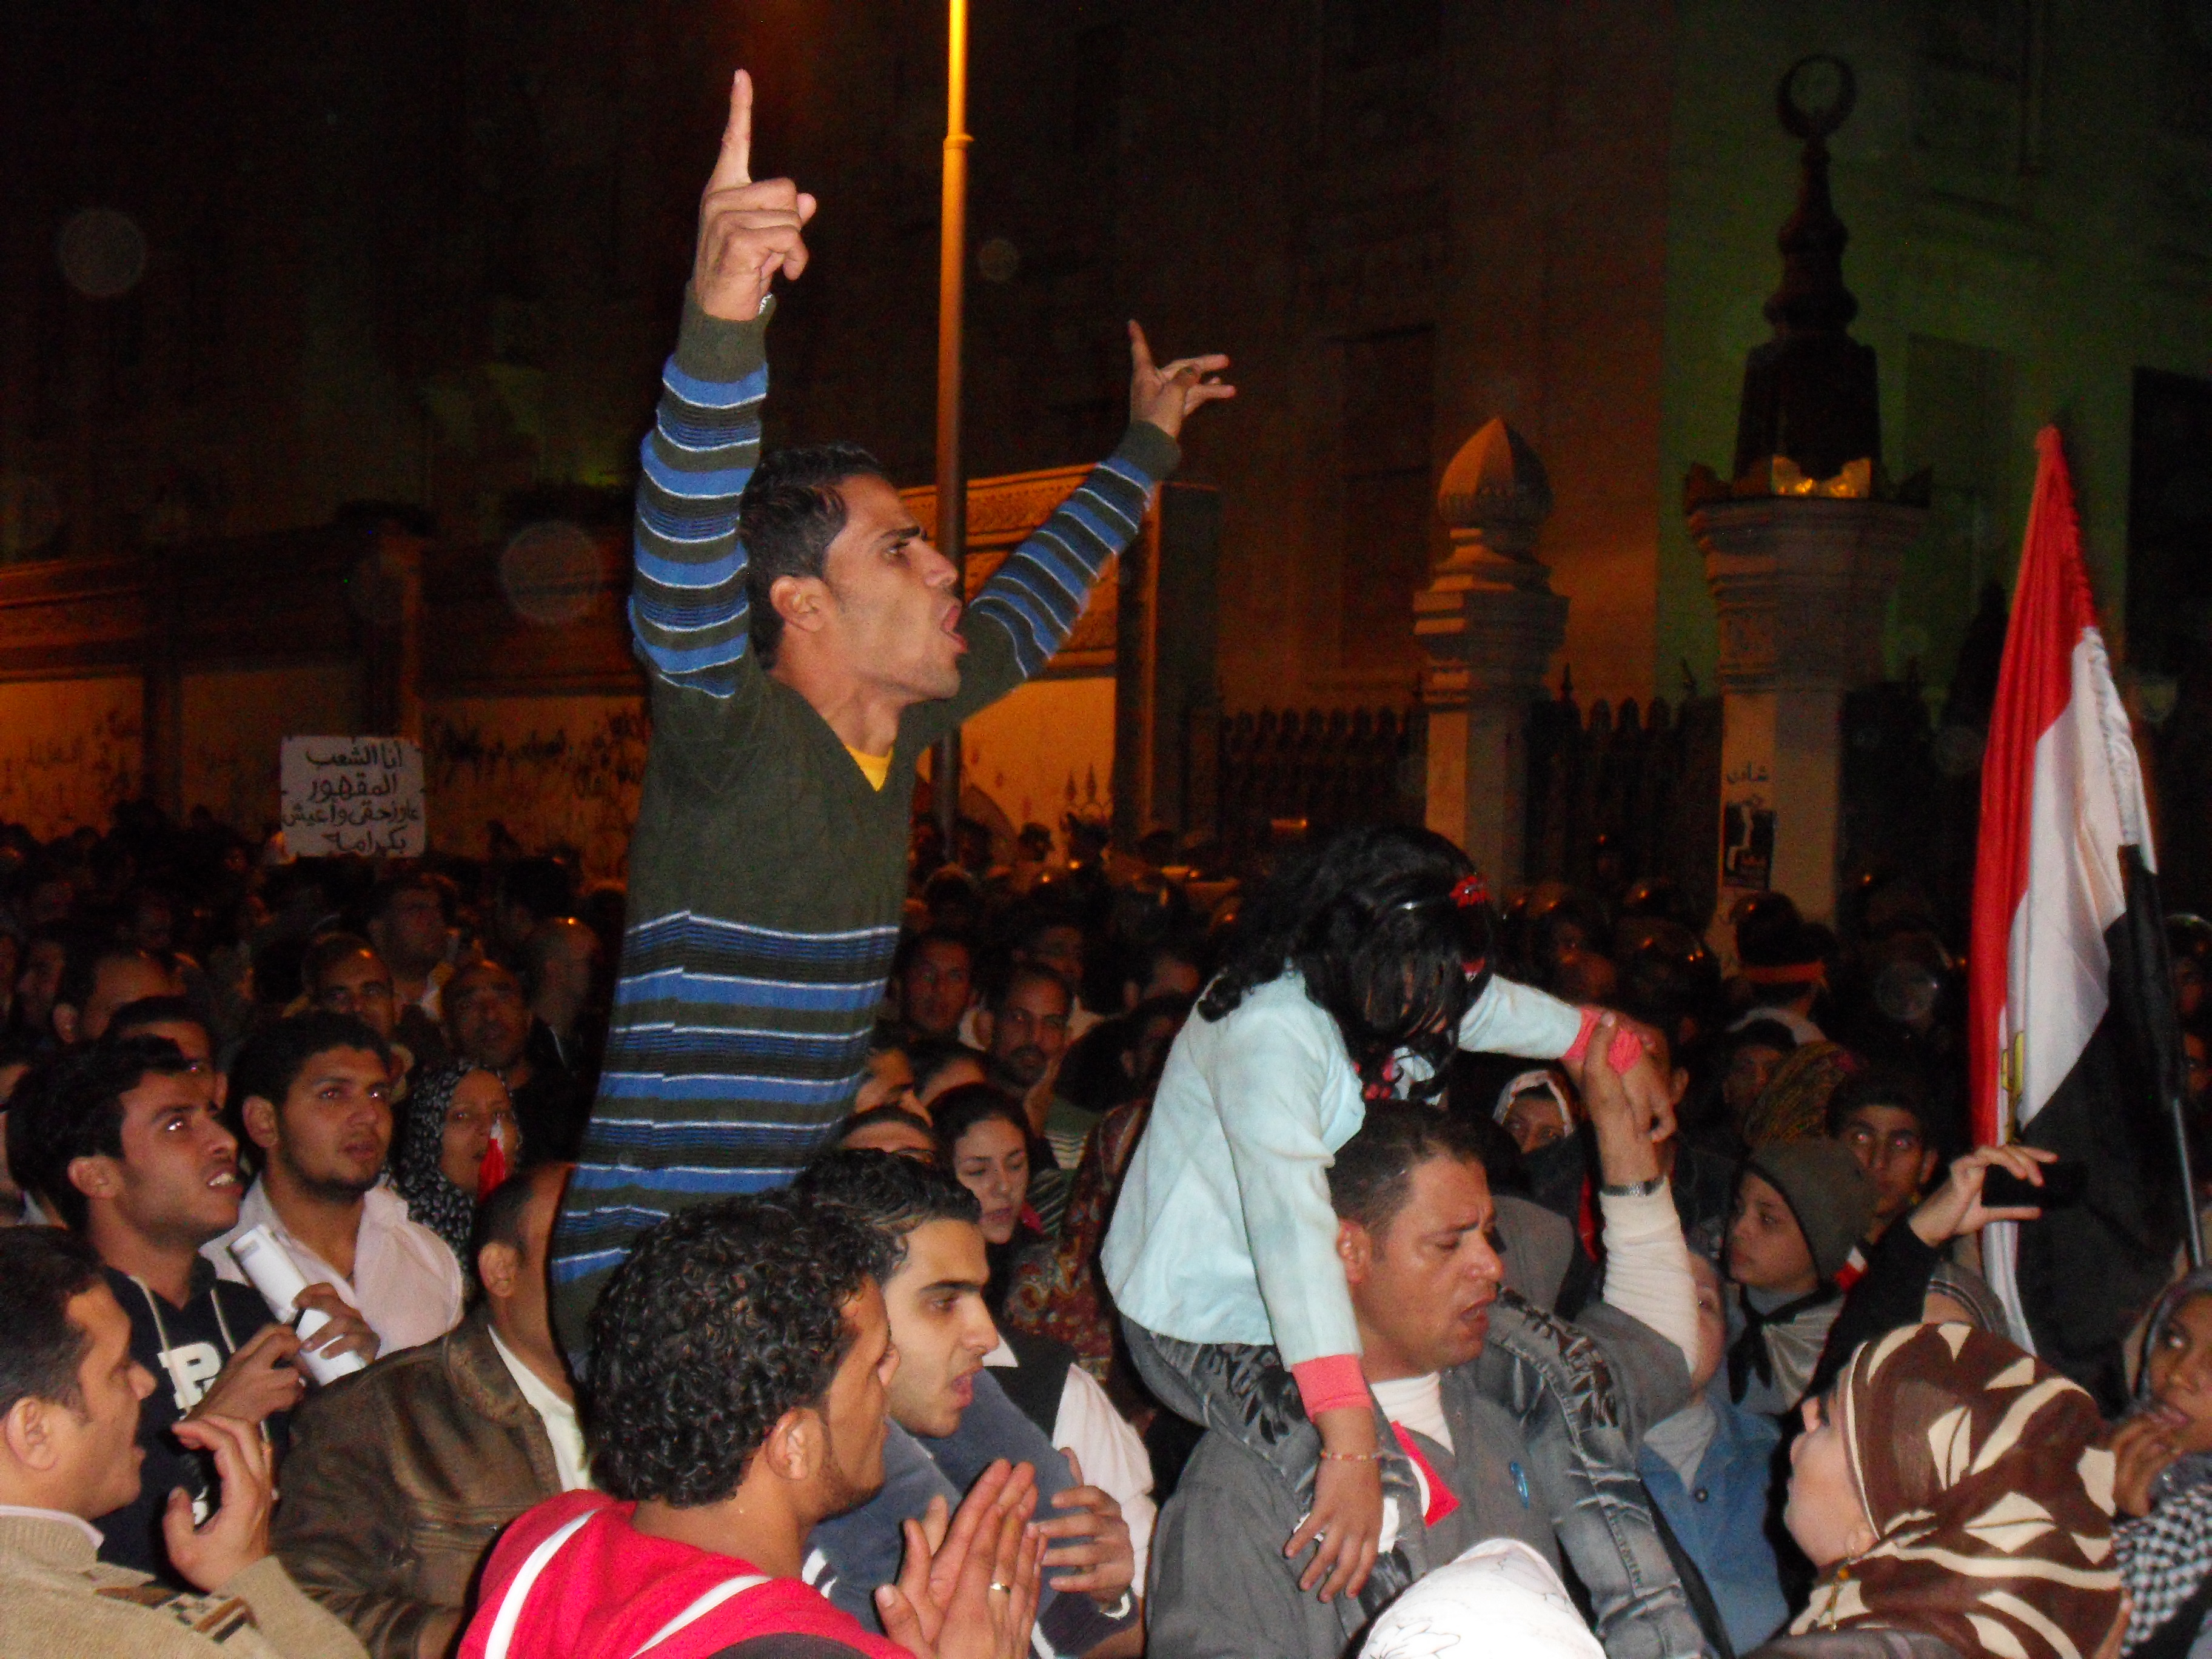 A man riling up the crowd against Morsi in front of the Palace's entrance.